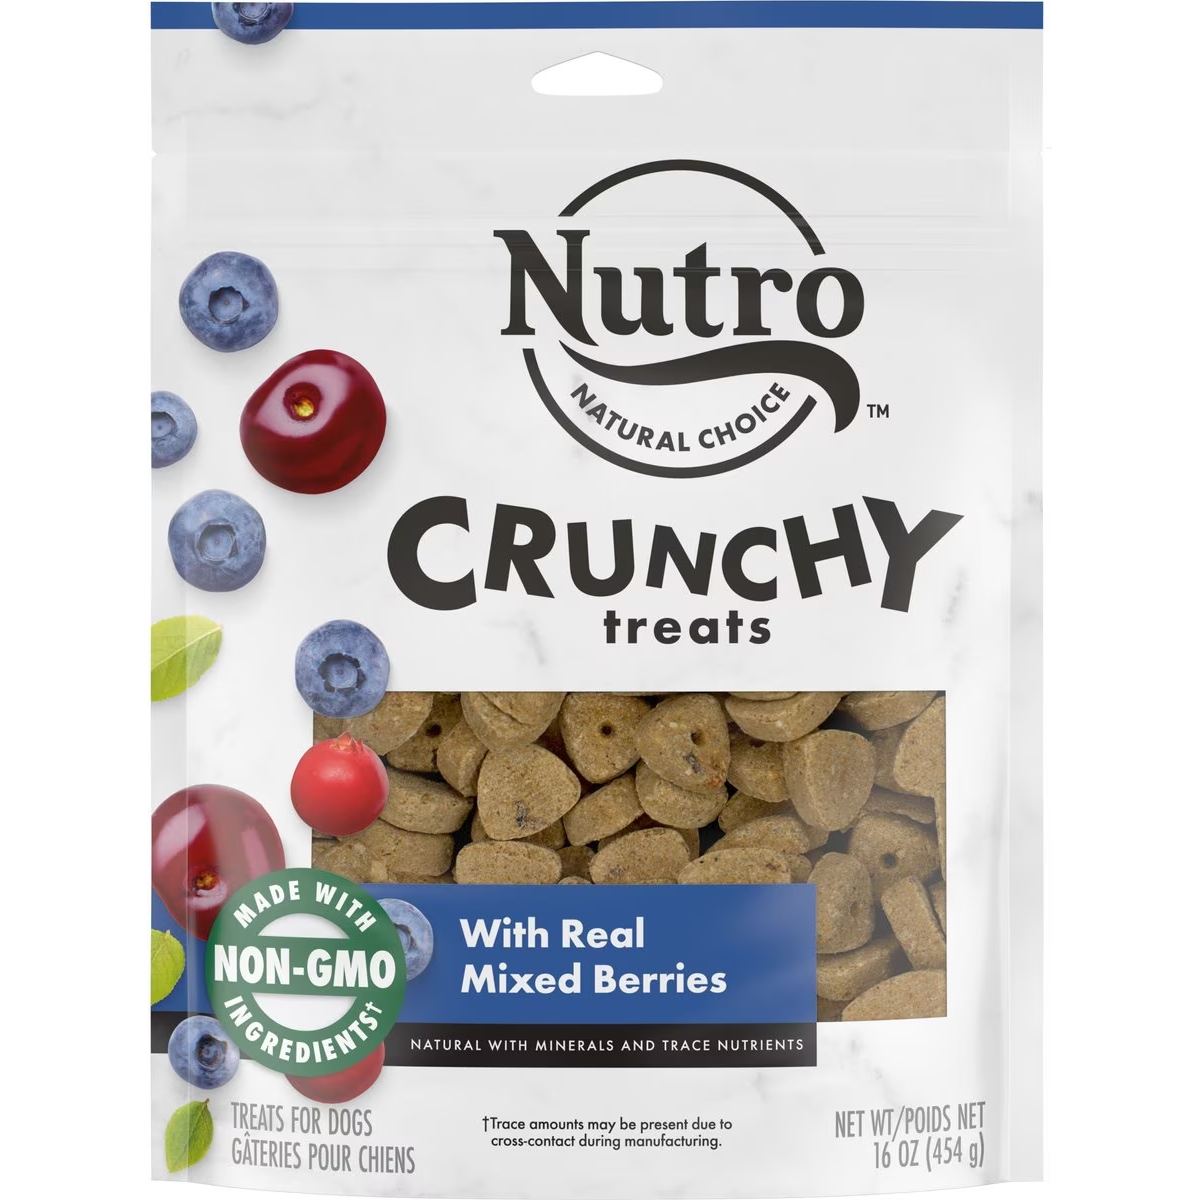 Nutro Crunchy with Real Mixed Berries Dog Treats